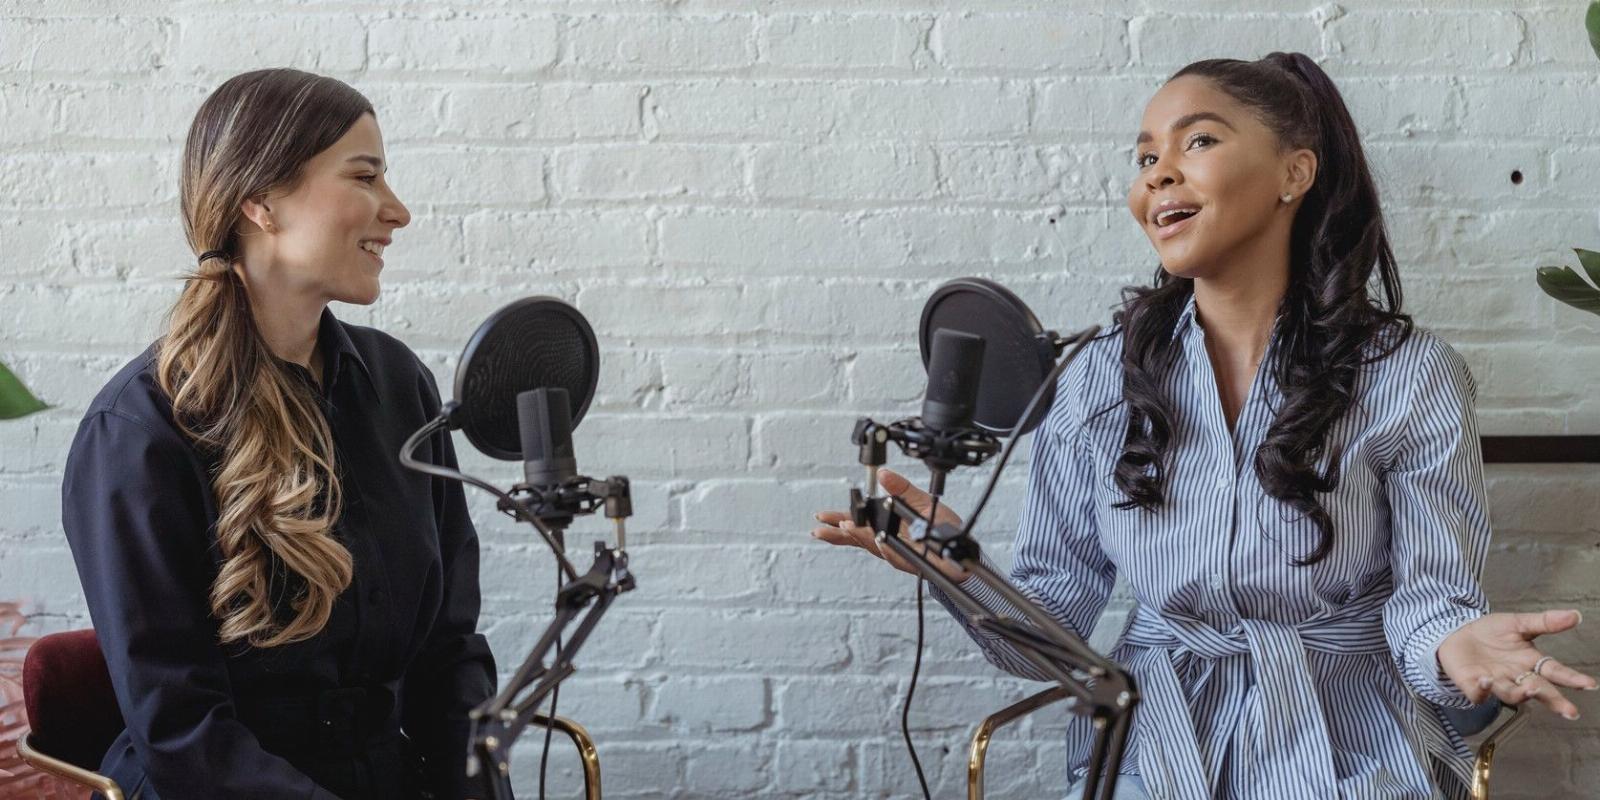 10 Podcasts About Relationships to Listen to With Your Partner